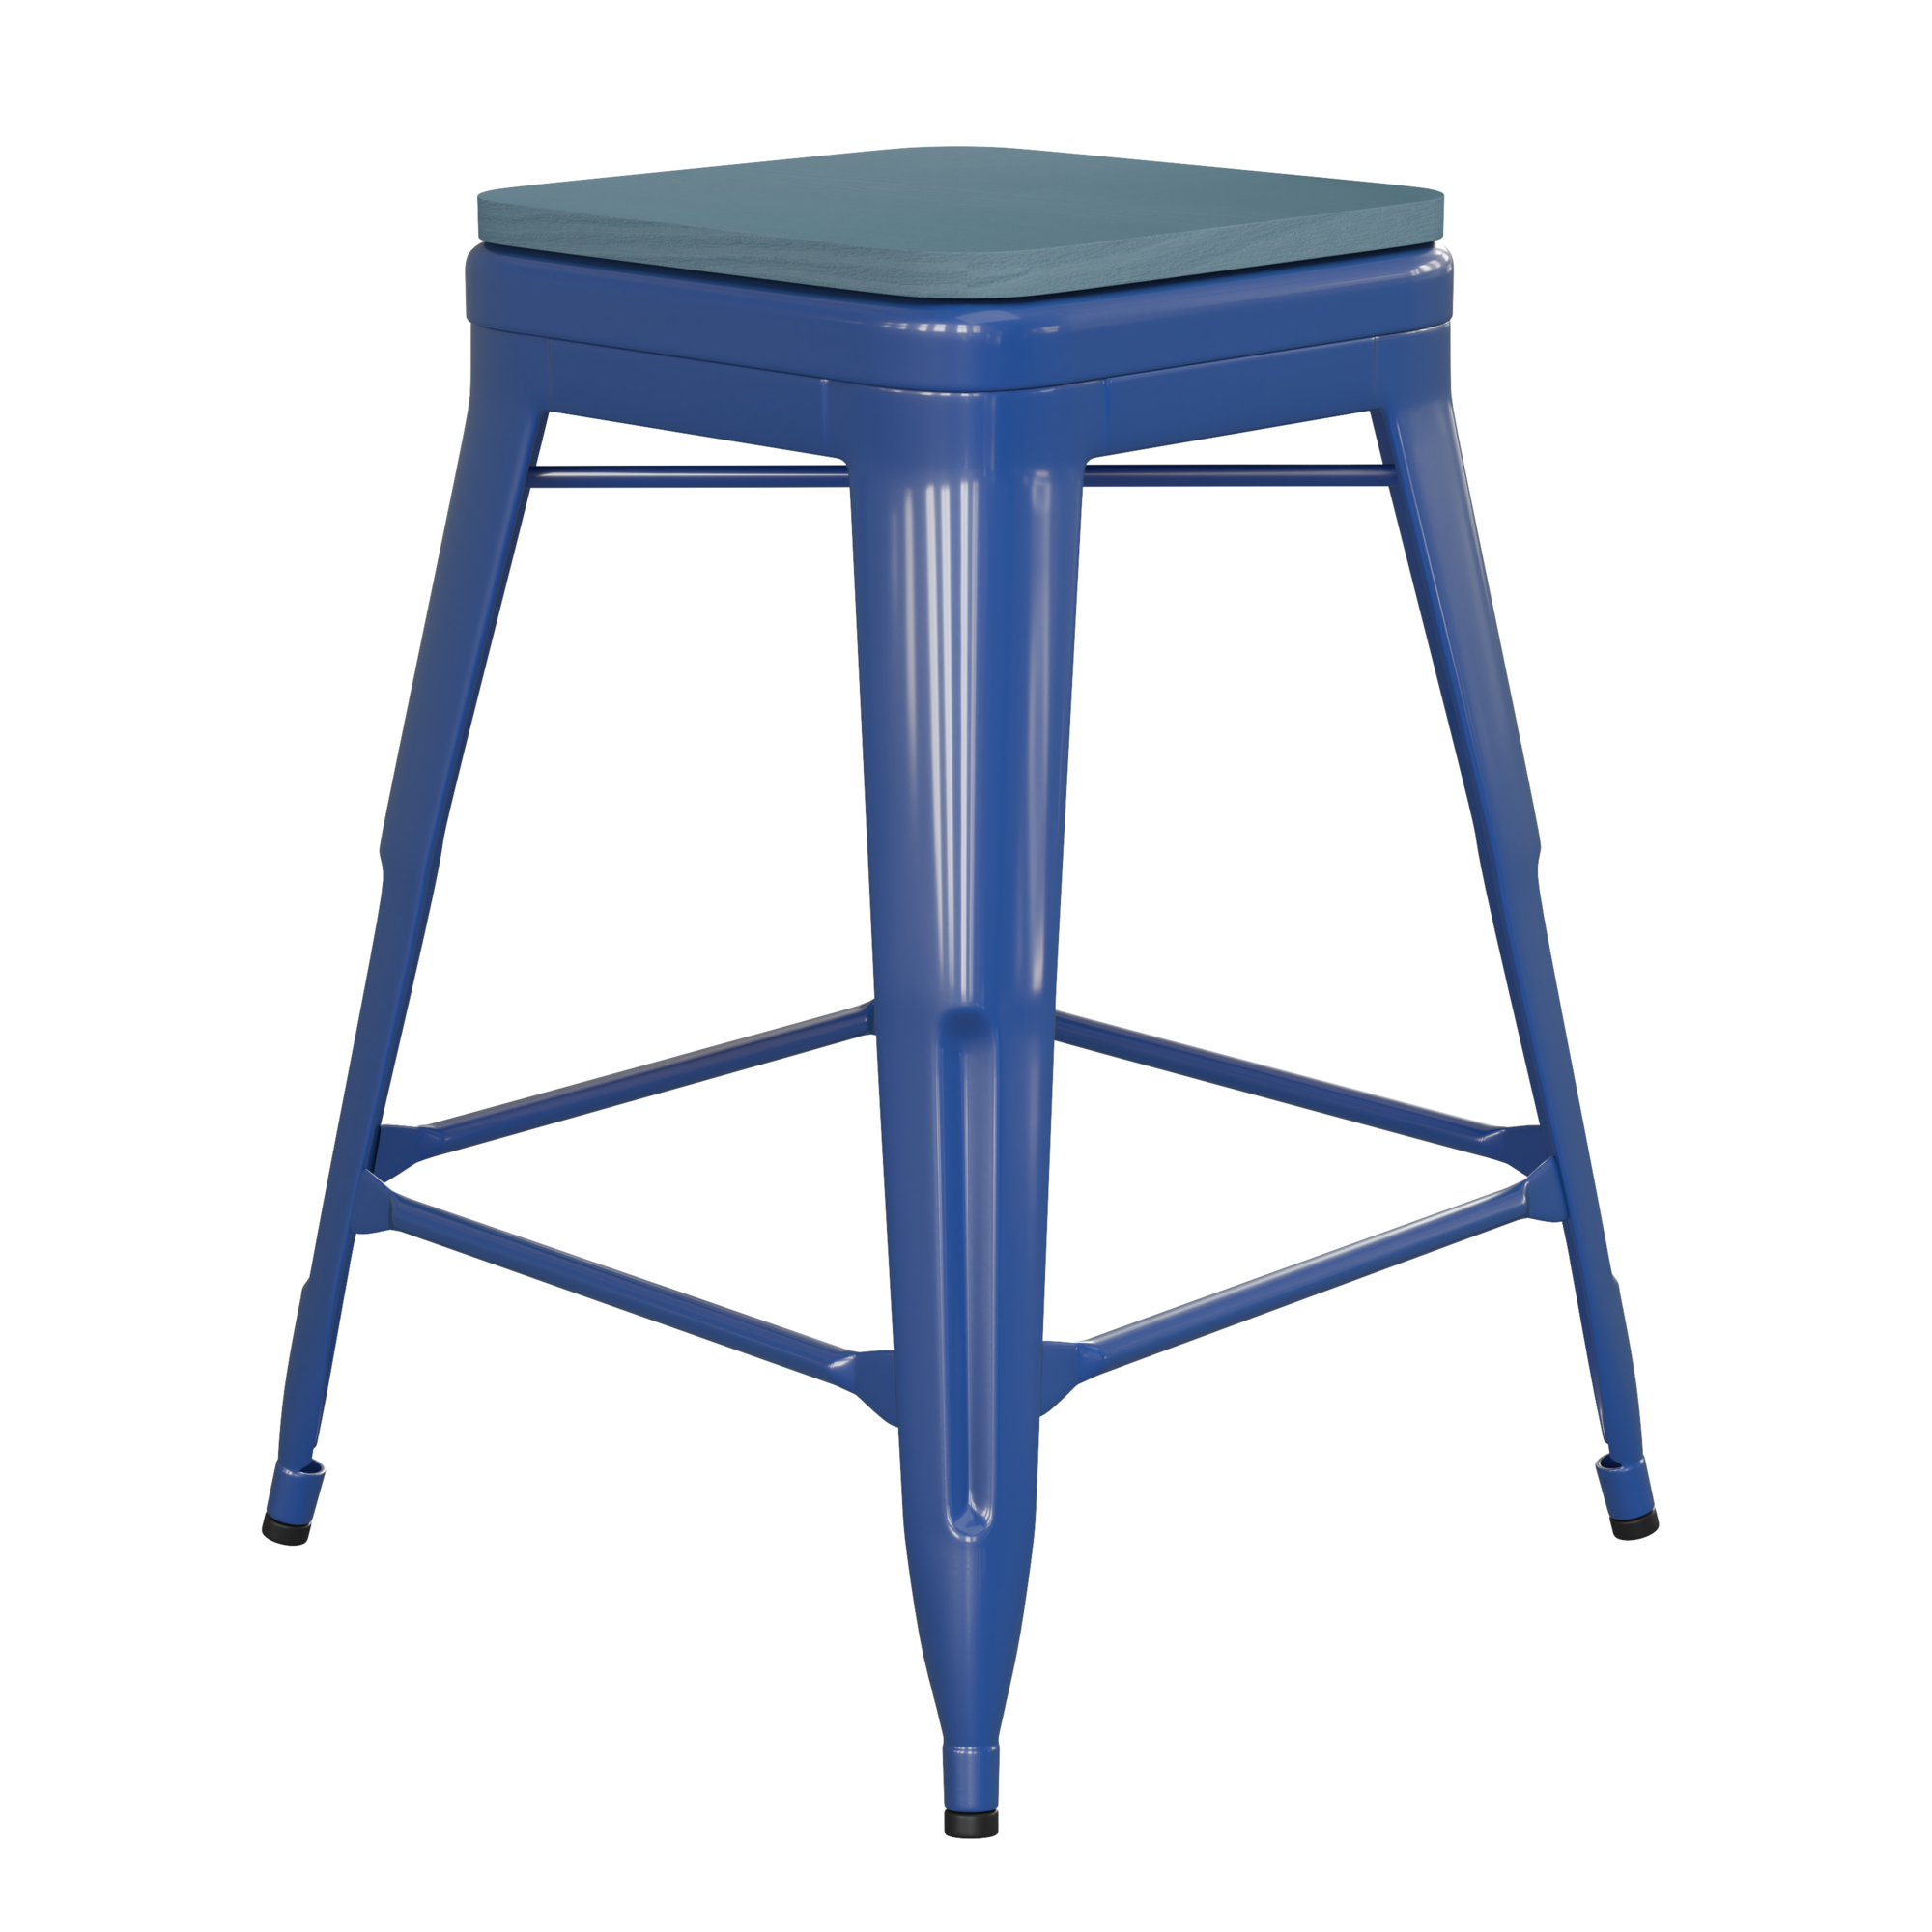 Flash Furniture, 24Inch Blue Metal Stool-Teal Blue Poly Seat, Primary Color Blue, Included (qty.) 1, Model CH3132024BLPL2C